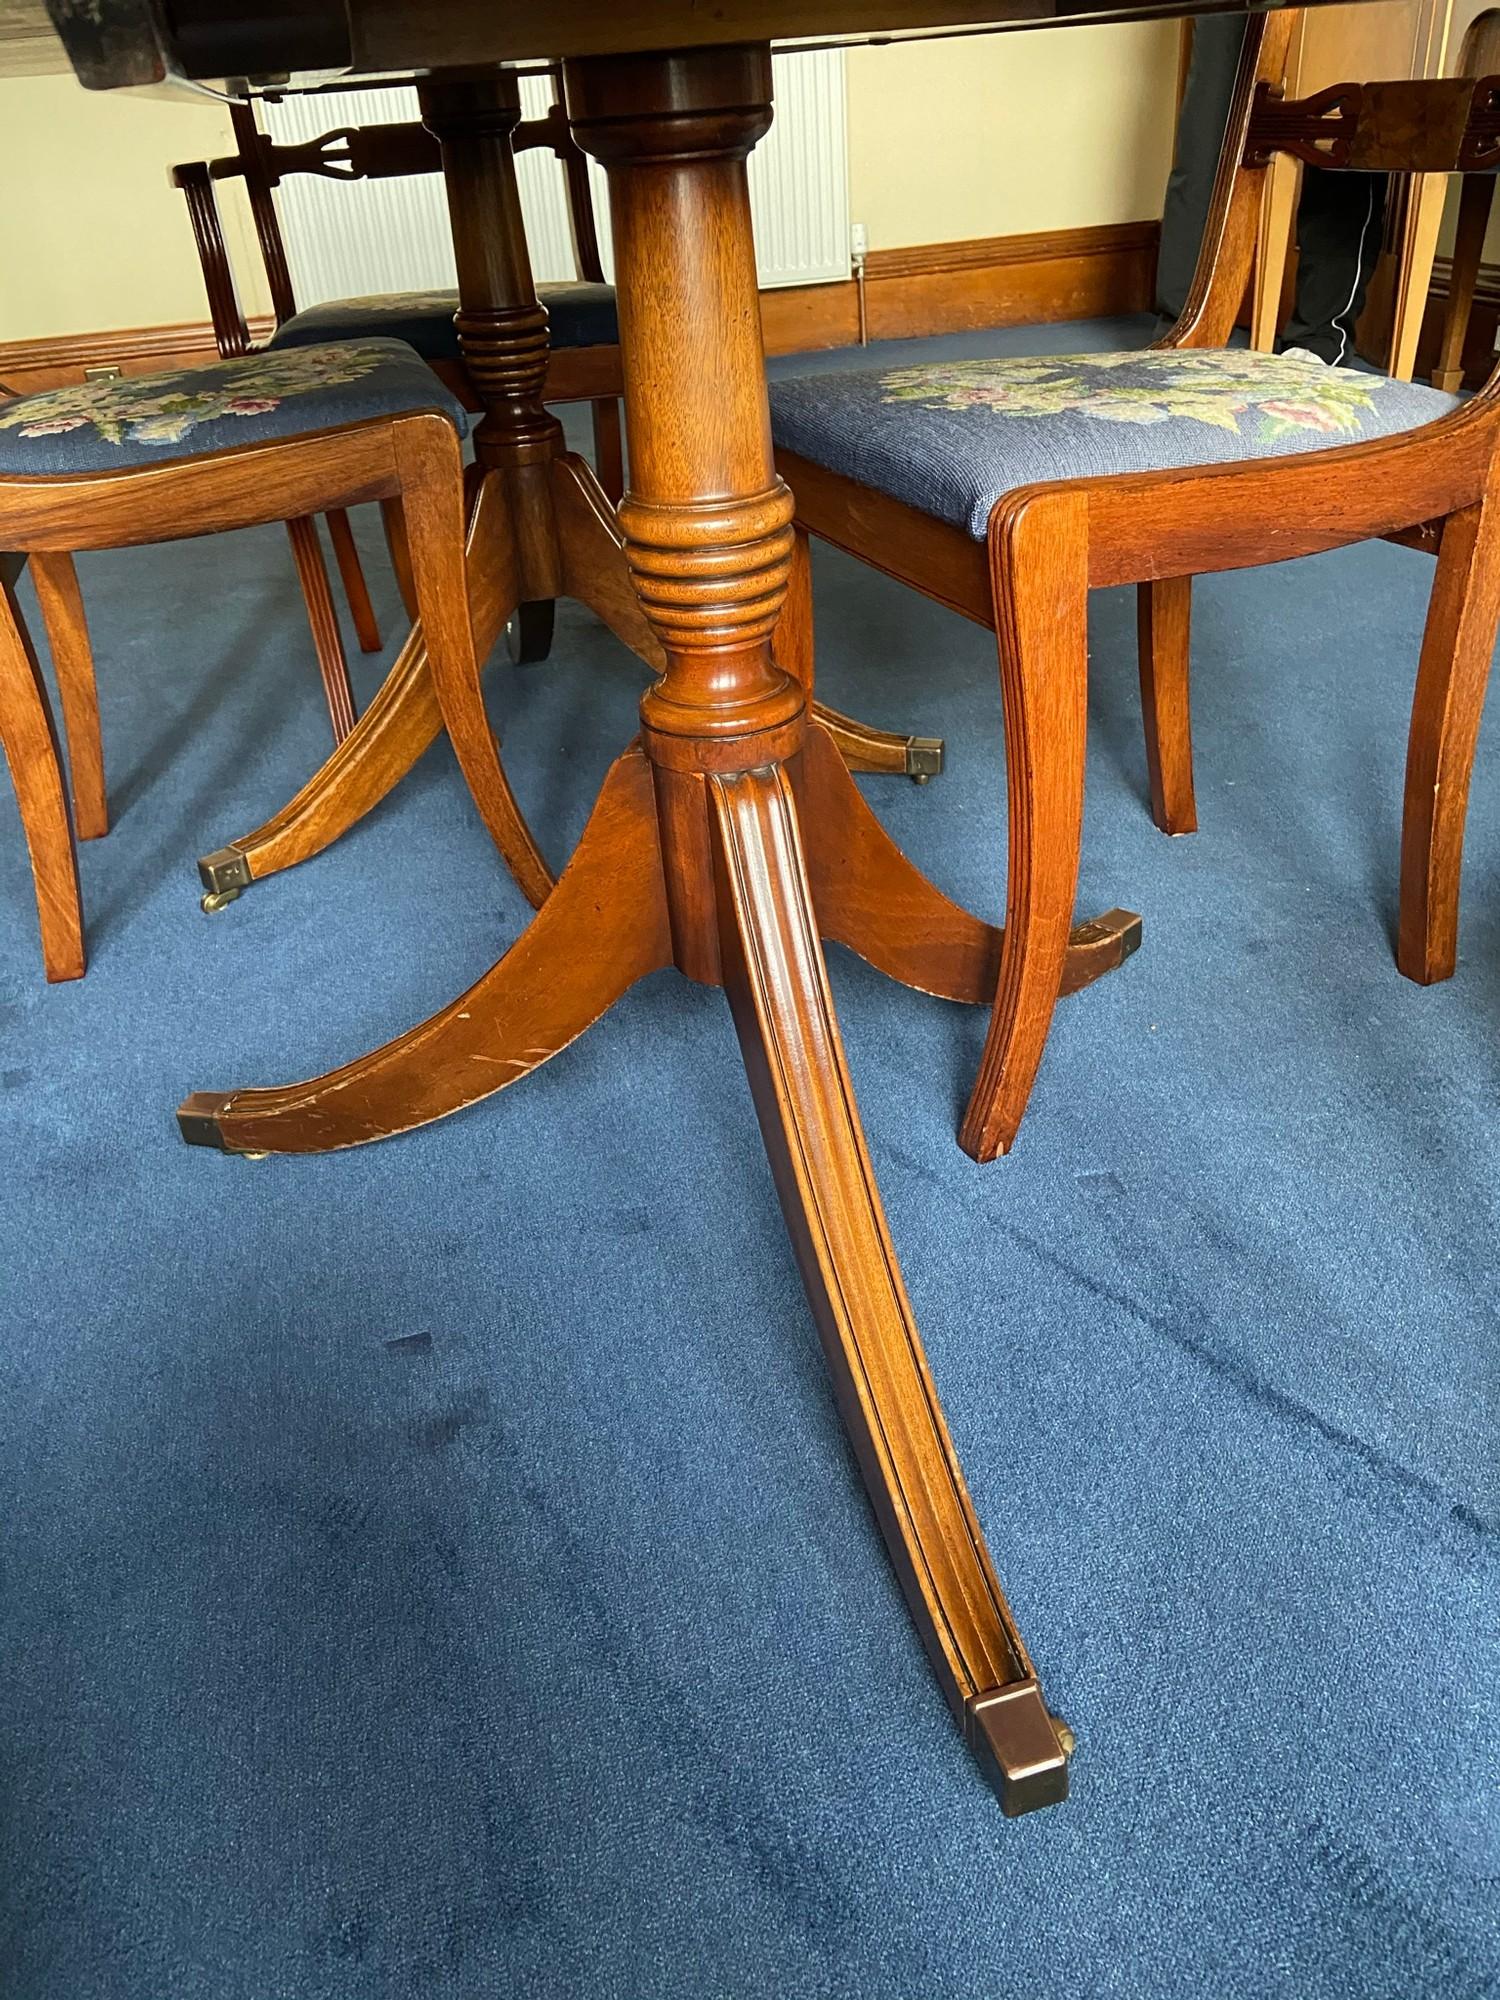 Antique mahogany dining table with single leaf, two chairs and matching two carvers - Image 2 of 6